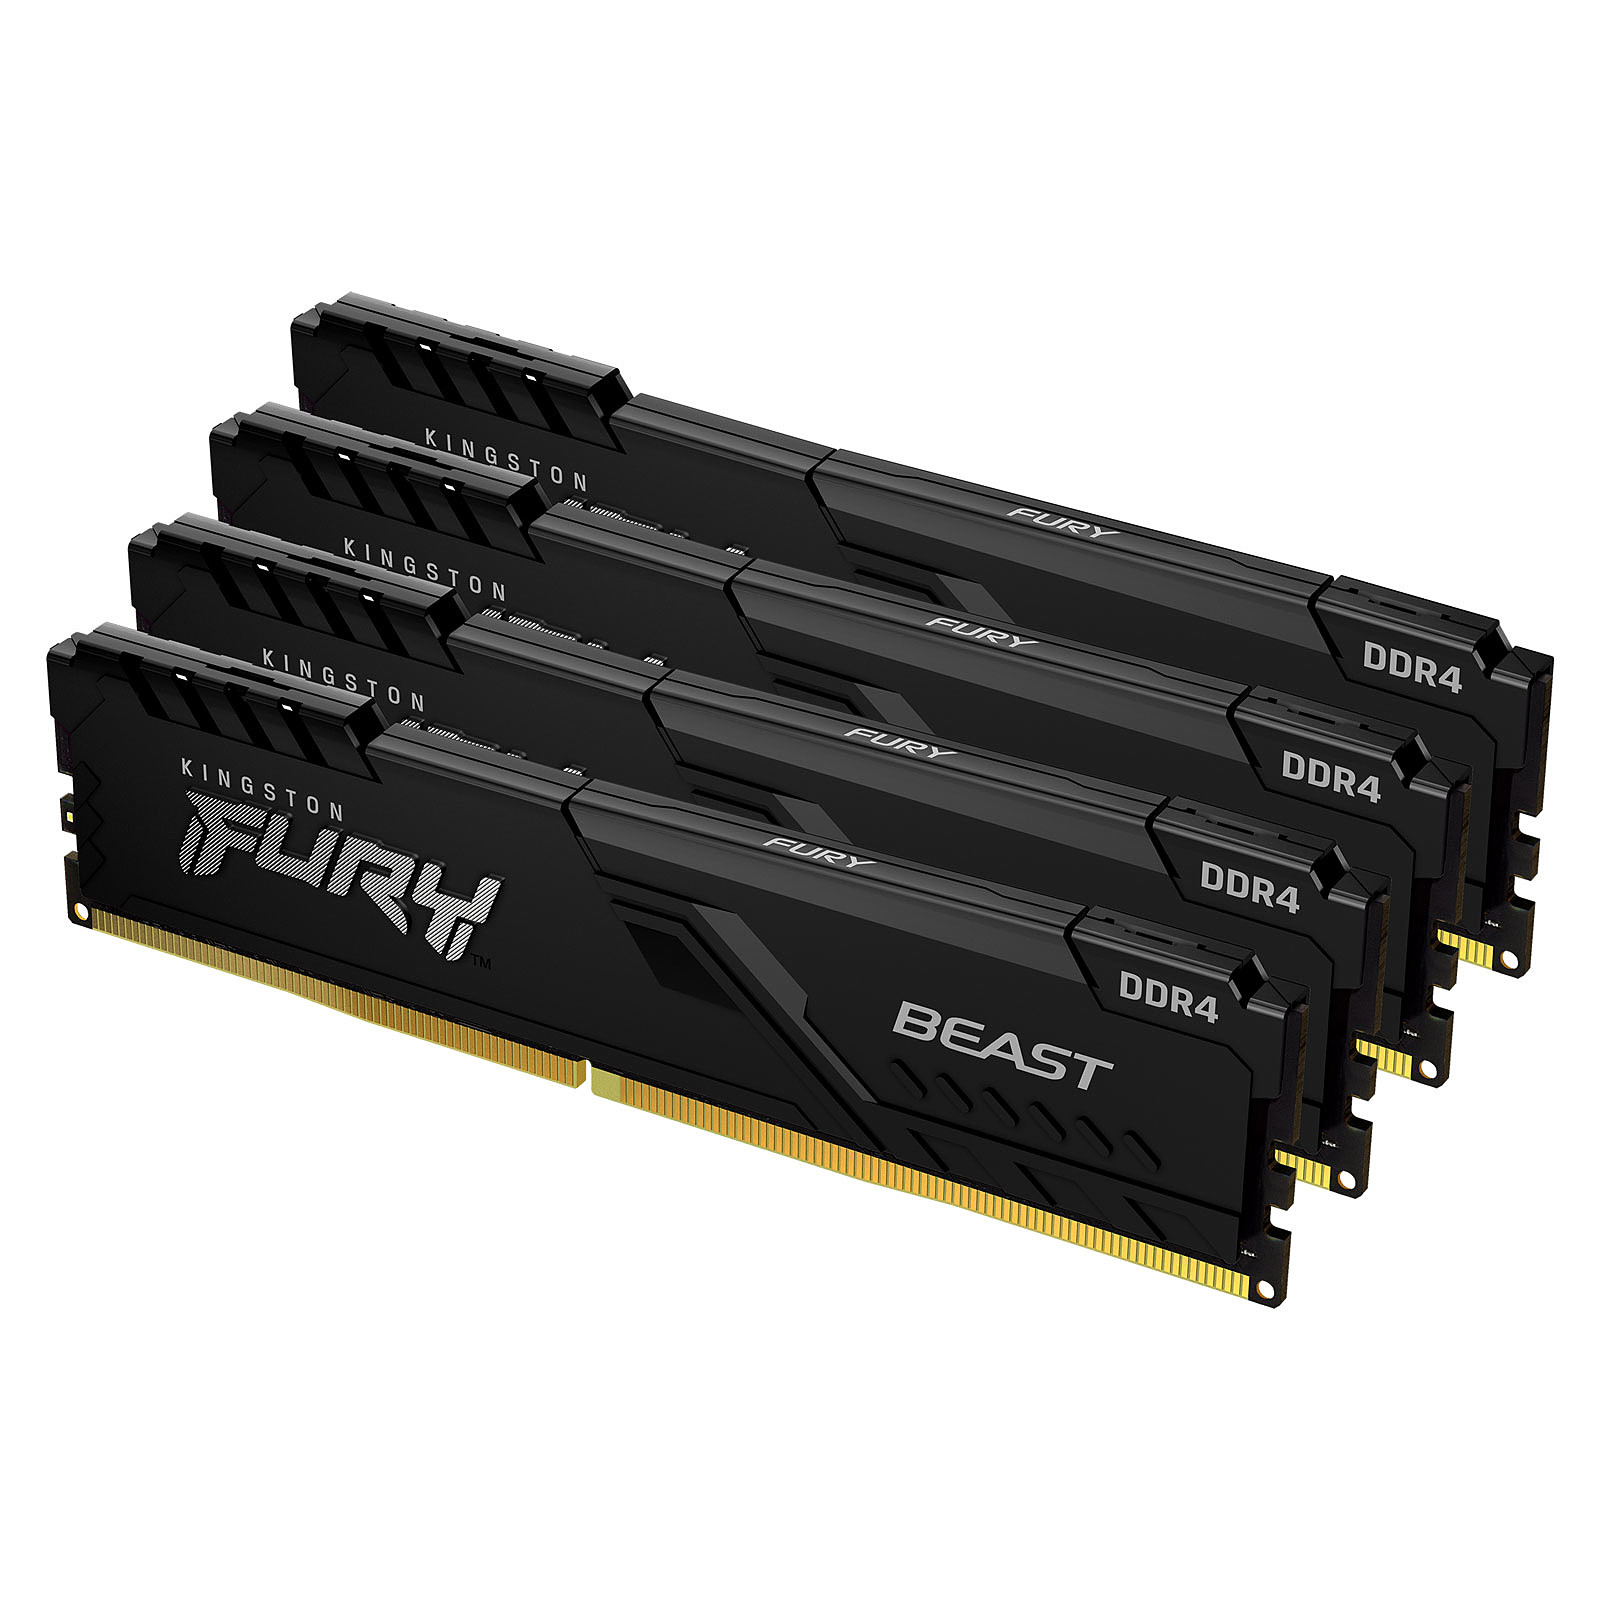 Kingston FURY Beast 64 Go (4 x 16 Go) DDR4 2666 MHz CL16 · Occasion - Memoire PC Kingston - Occasion